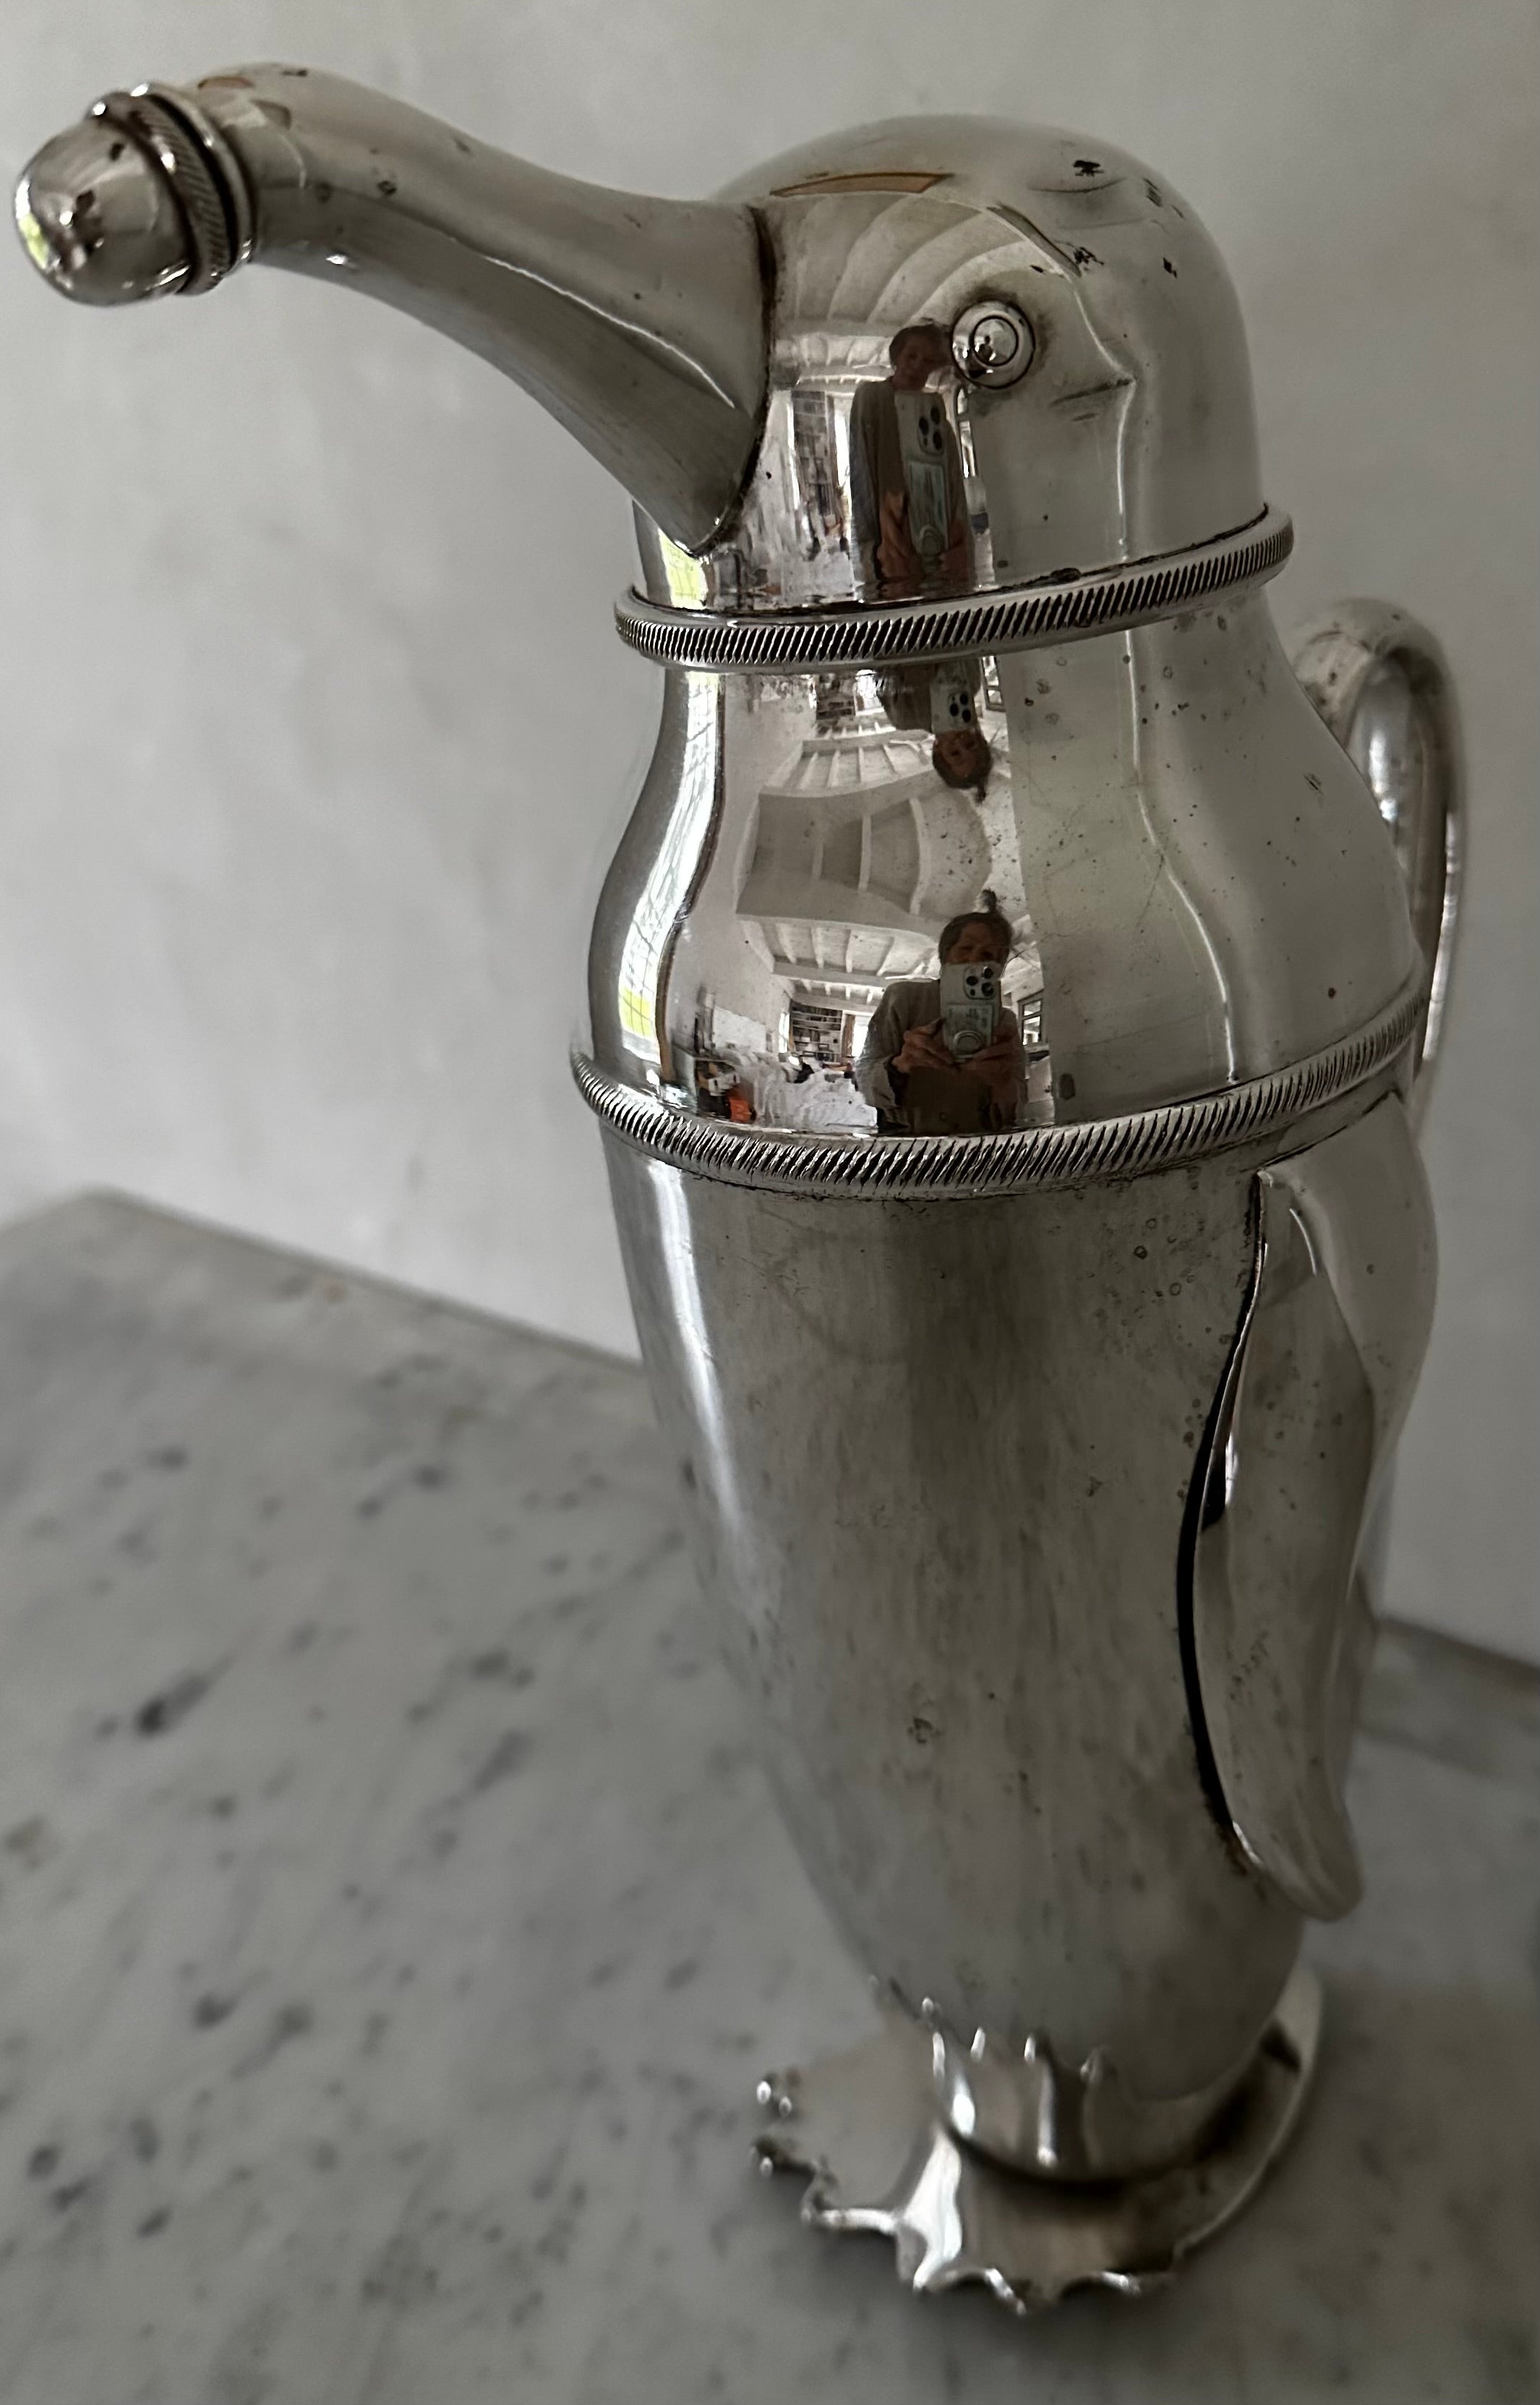 Wonderfully charming silver plated cocktail shaker,  bar or water pitcher in the form a penguin with a screwed on cap at the end of the spout and the head that lifts off for filling.  The pitcher sits on penguin feet making it extra special and a